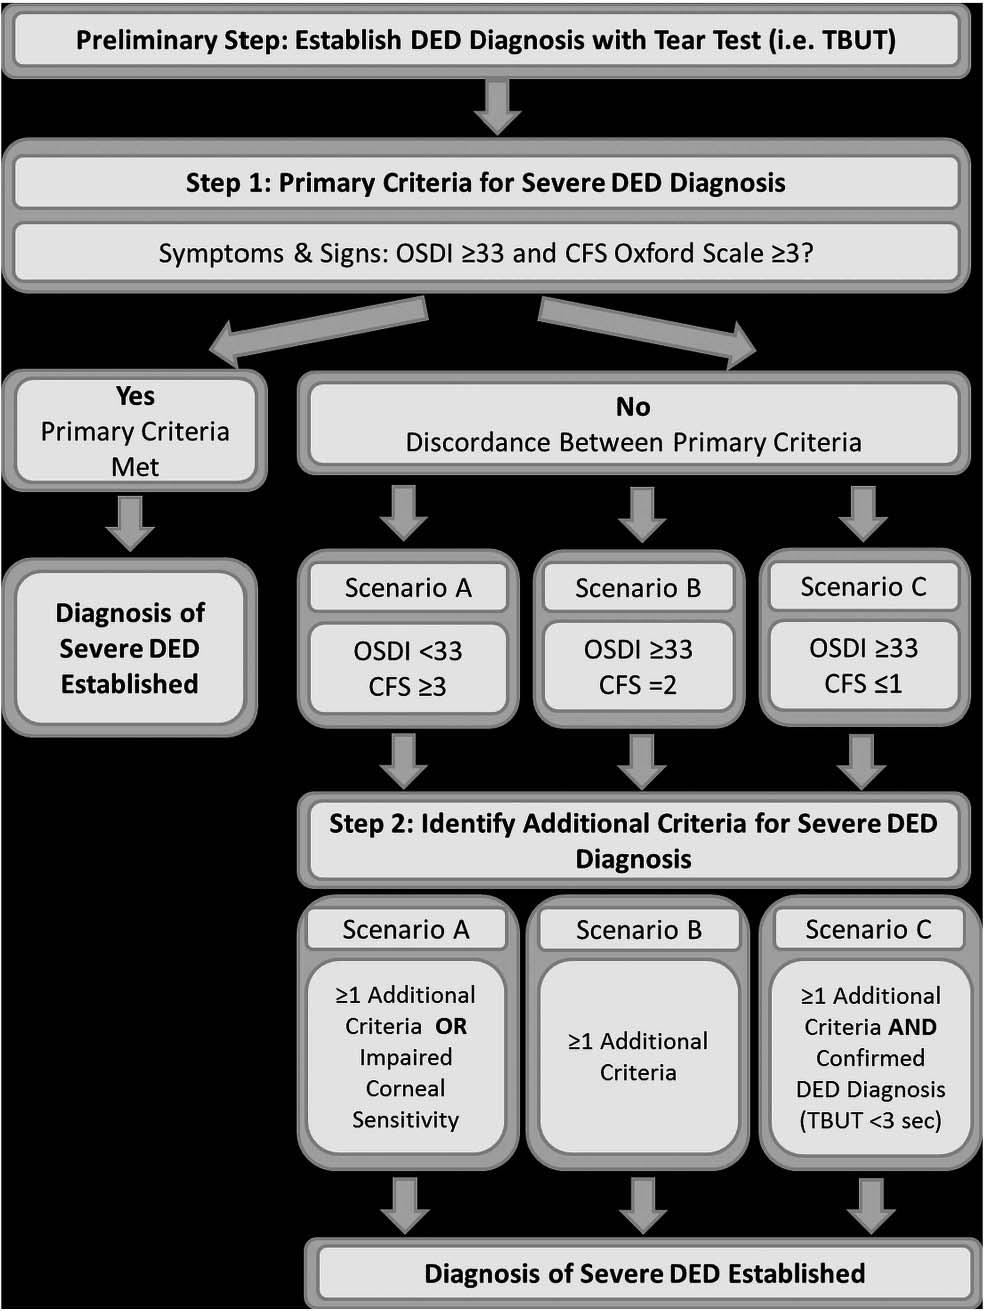 FIGURE 3. Diagnostic criteria and scoring algorithm for DED proposed by the Ocular Dryness Disease Severity (ODISSEY) European Consensus Group of dry eye specialists.